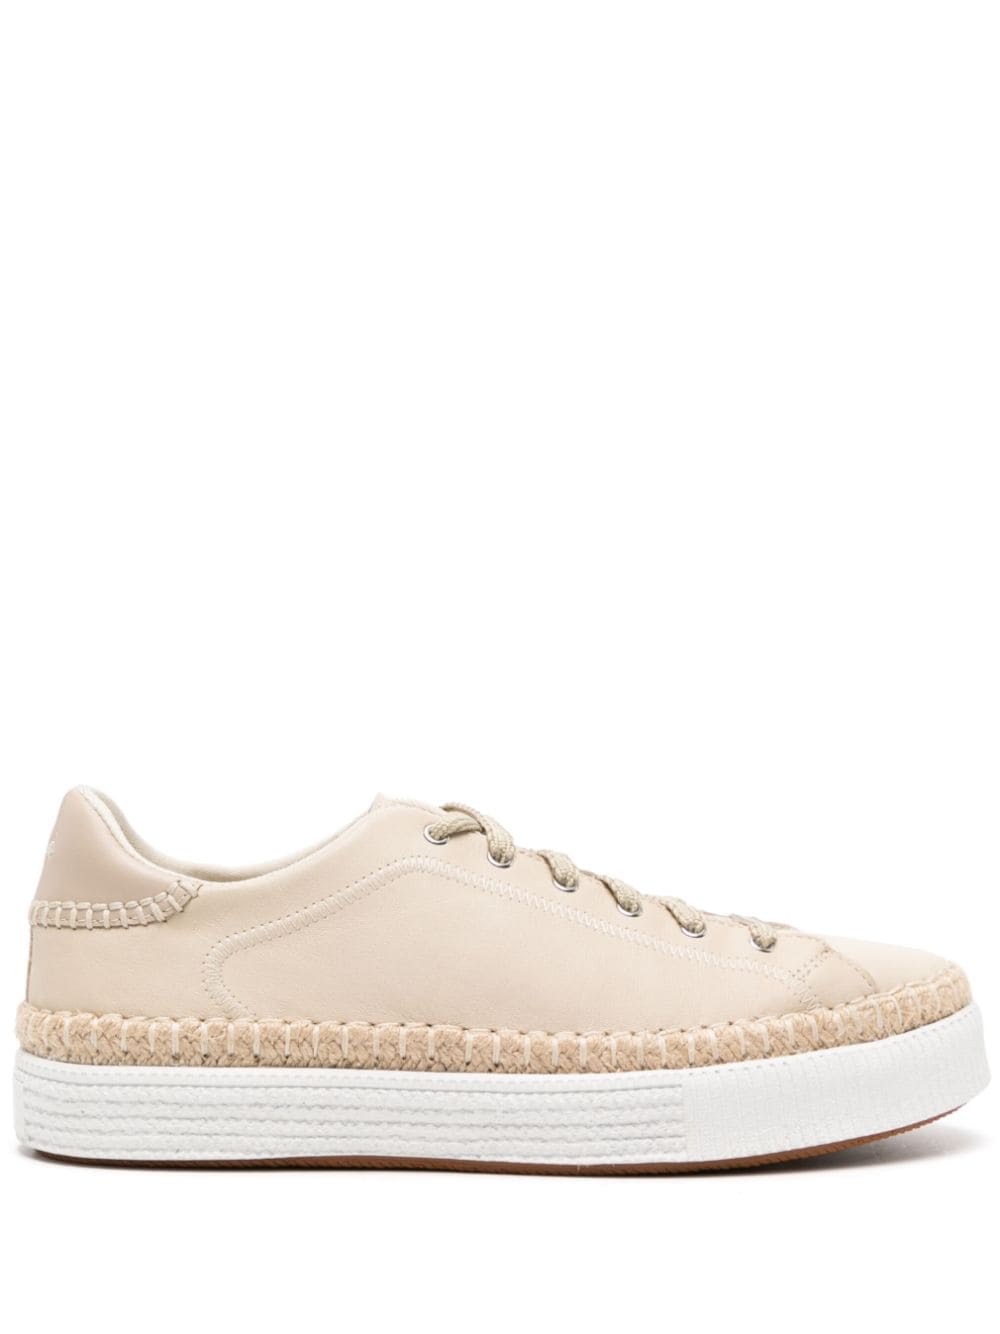 Image 1 of Chloé Telma leather sneakers